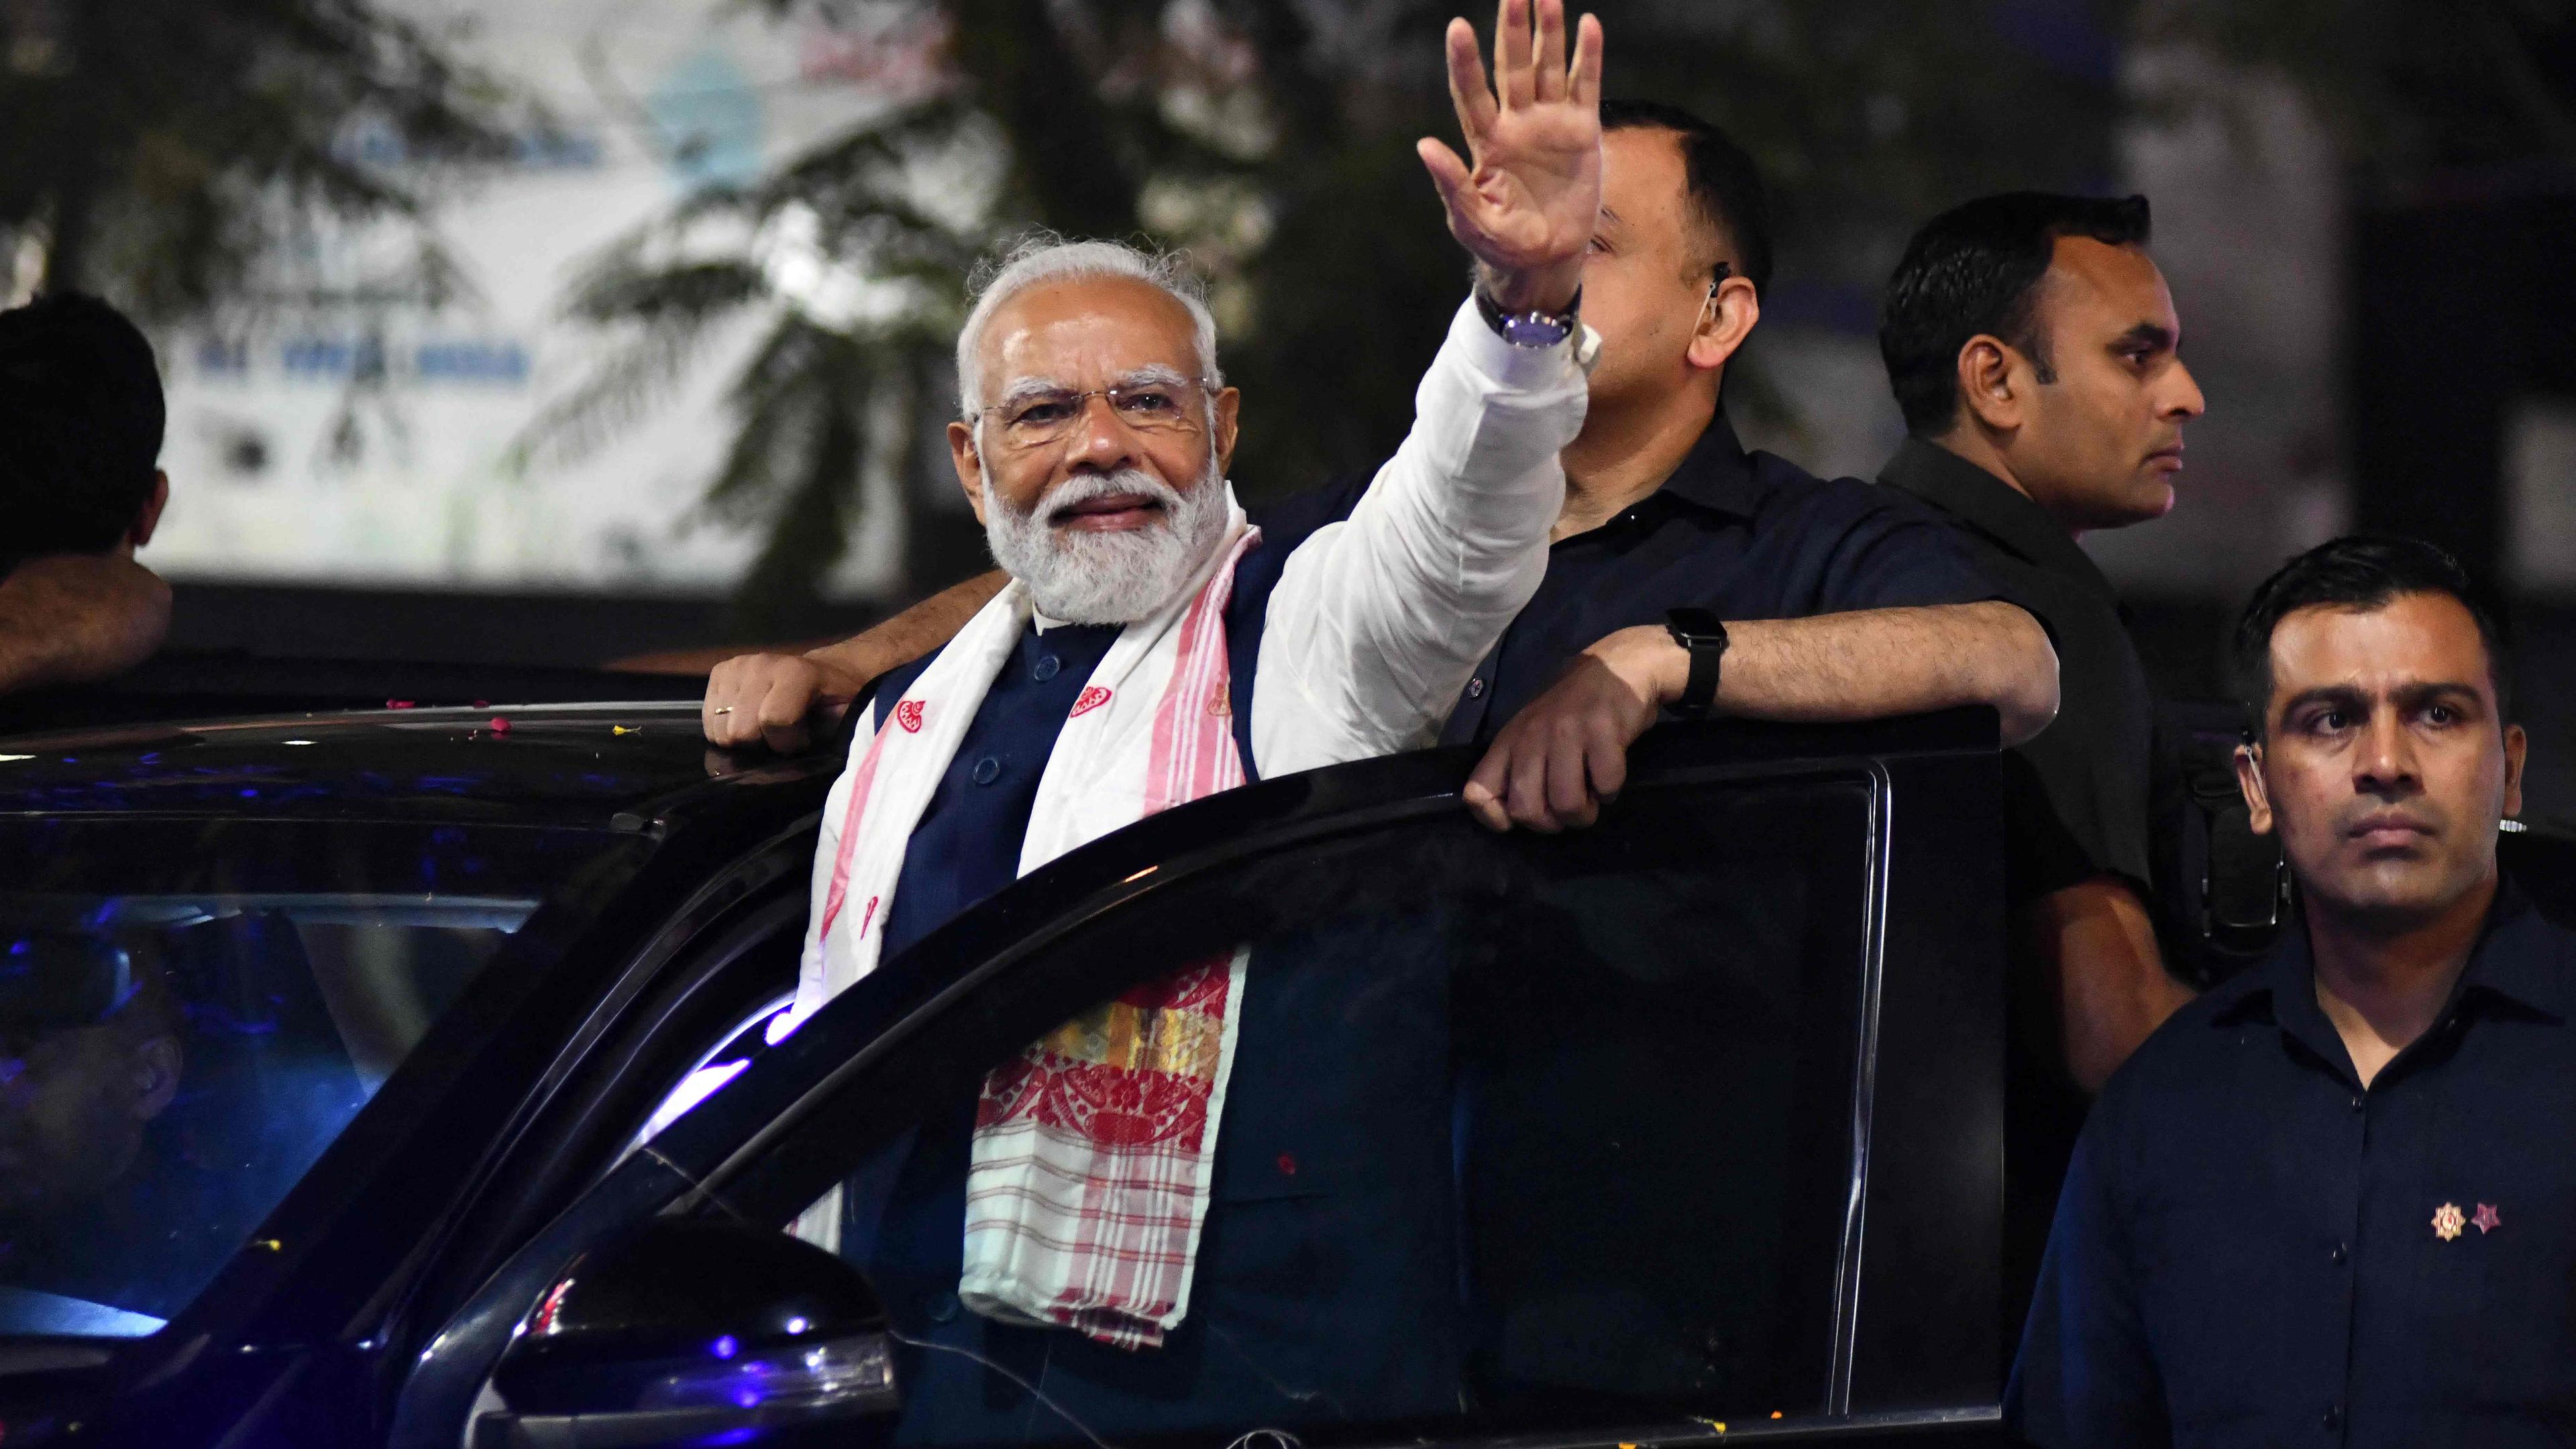 Indian prime minister and leader of the Bharatiya Janata Party (BJP) Narendra Modi waves to supporters during an campaign event on 16 April. Polls in the world’s biggest election open for six weeks from Thursday